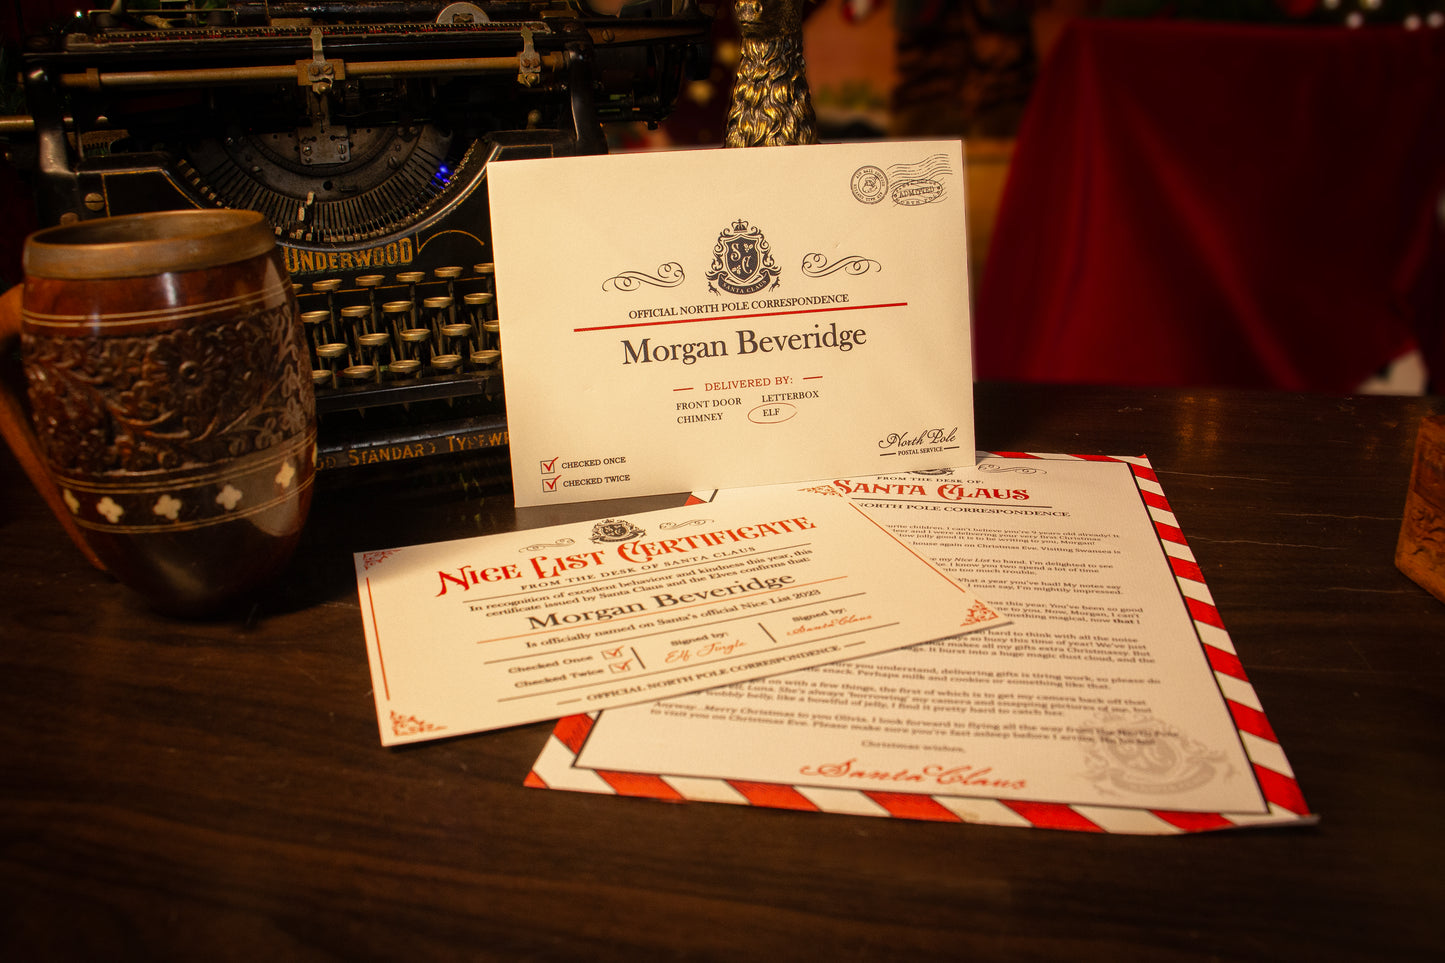 Luxury Authentic Personalised Santa Letter & Nice List Certificate 2023 + FREE extras (Sold Out)